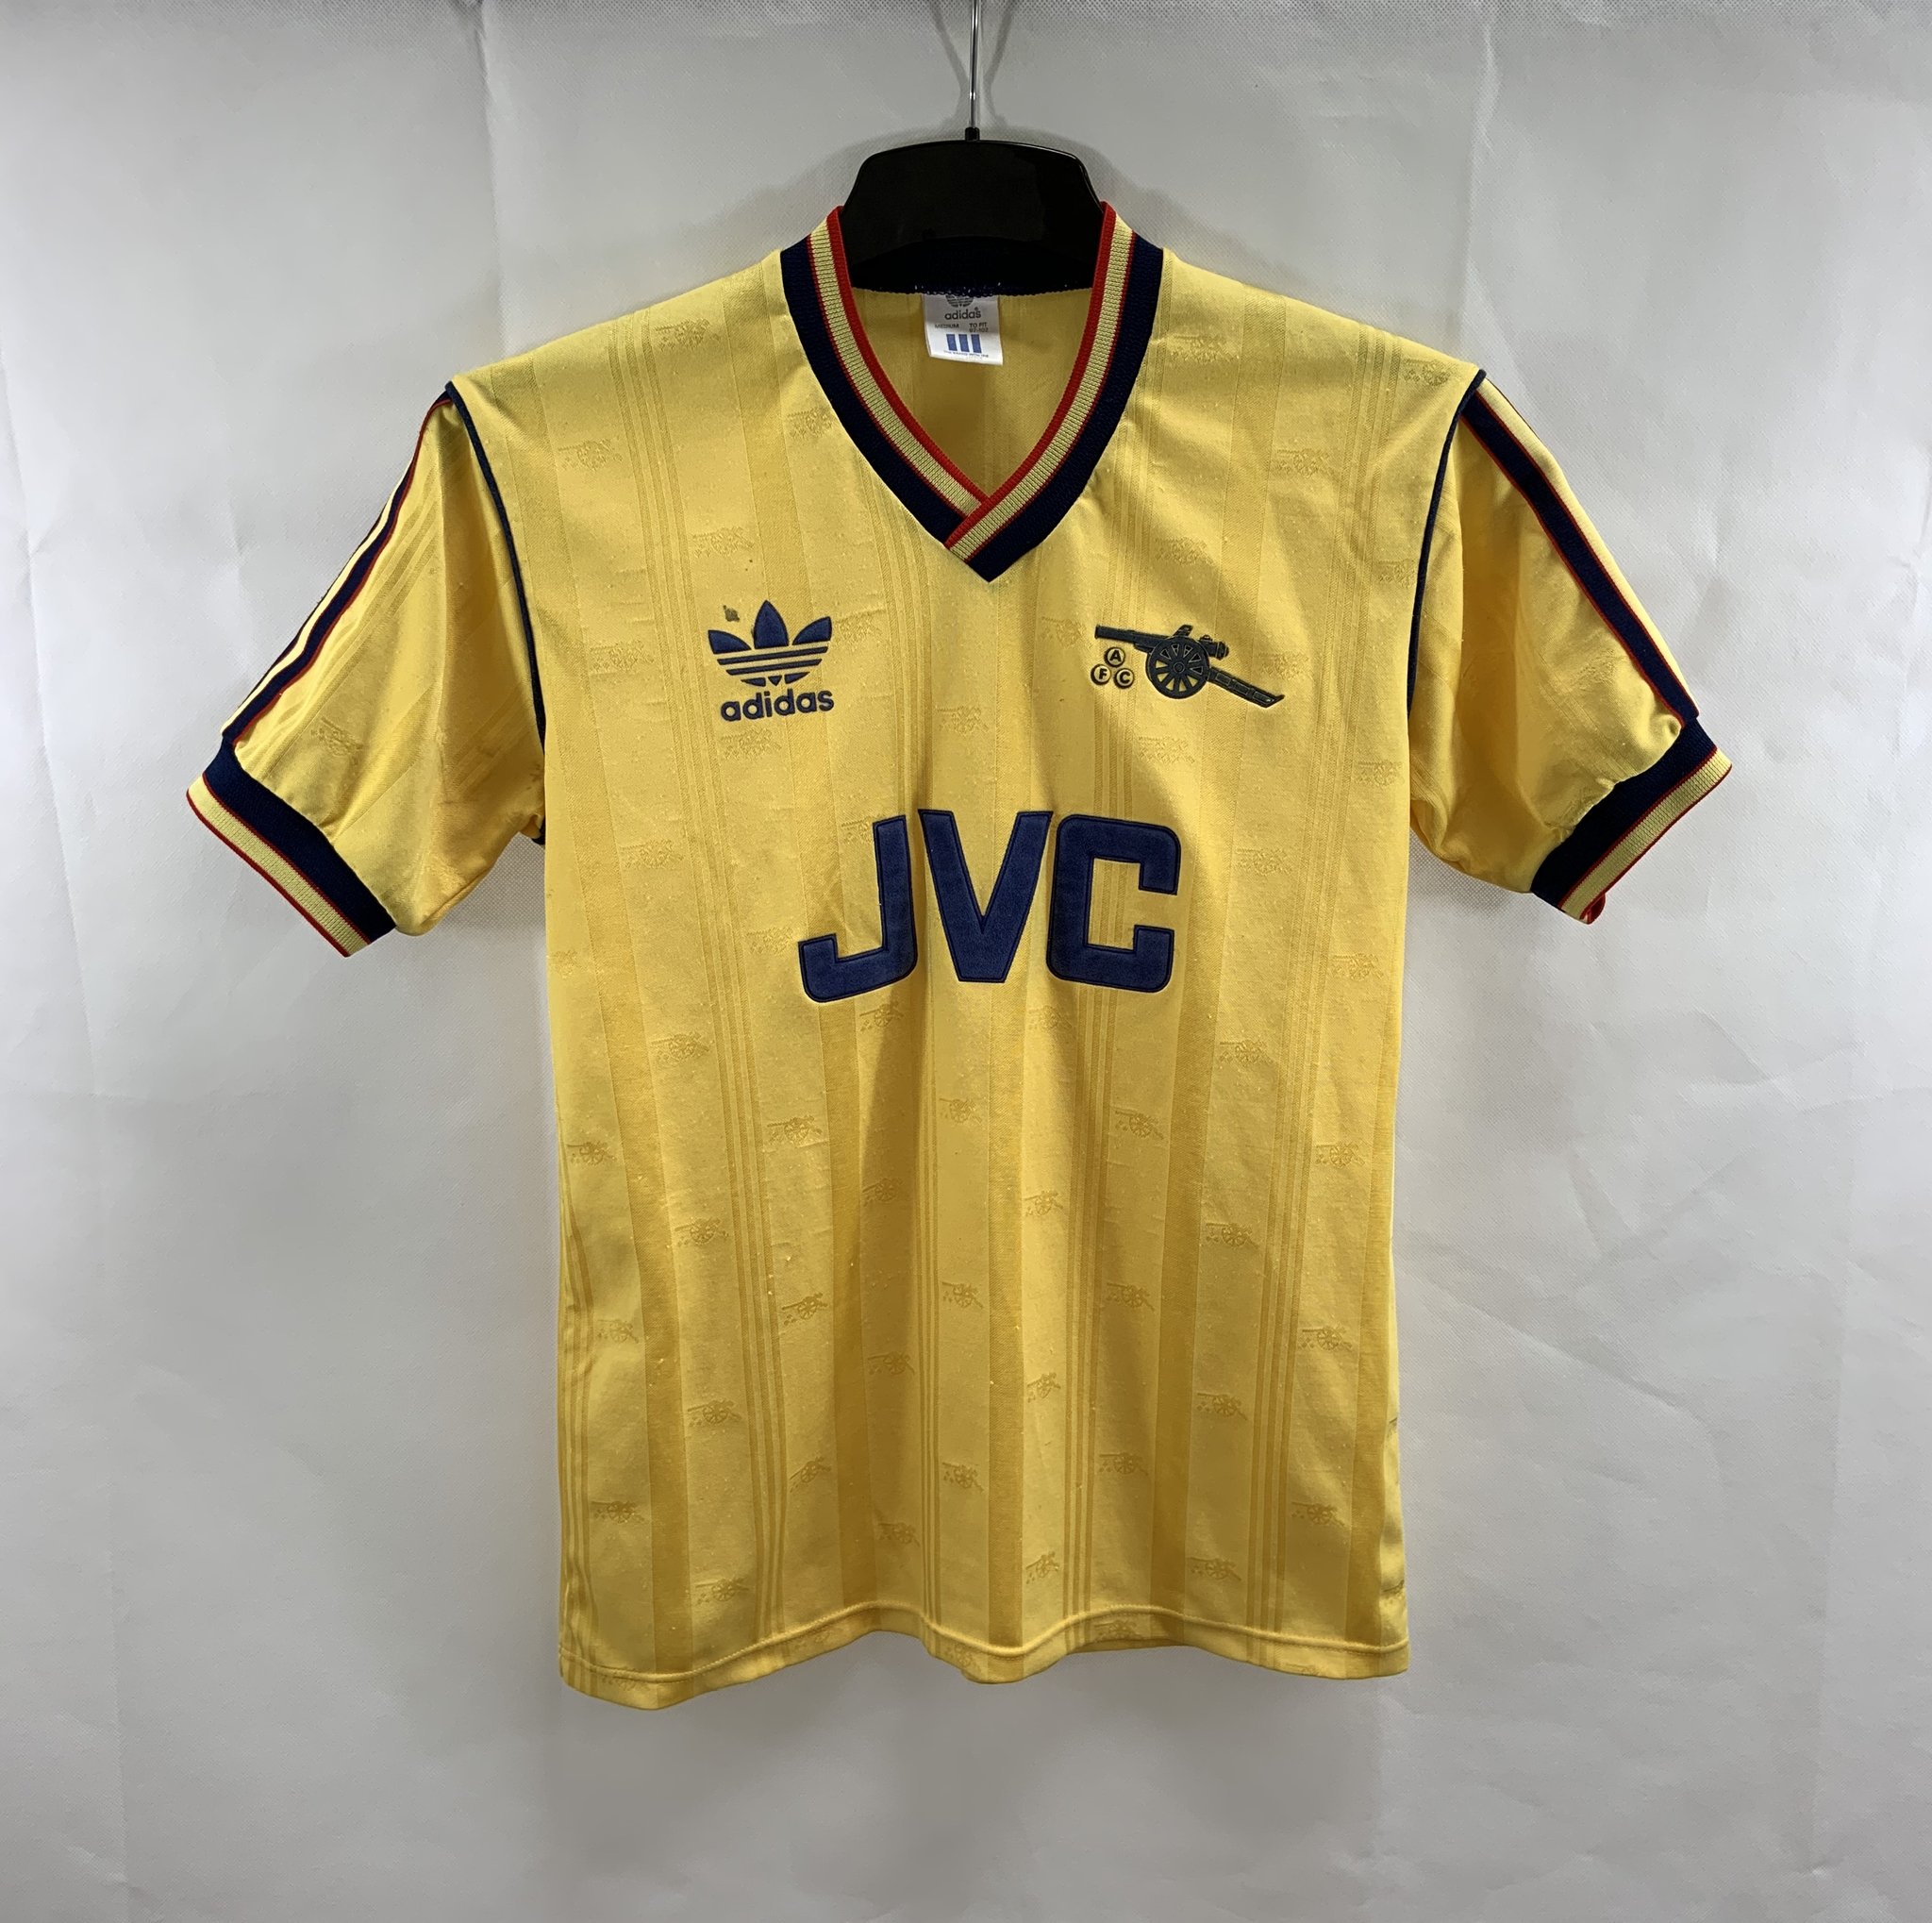 Fietstaxi werkzaamheid Werkelijk afcstuff on Twitter: "The 2021/22 Arsenal away kit is inspired by the  club's 1971 away shirt &amp; 1989 away shirt to be concrete &amp; like the  latter, the kit features navy logos